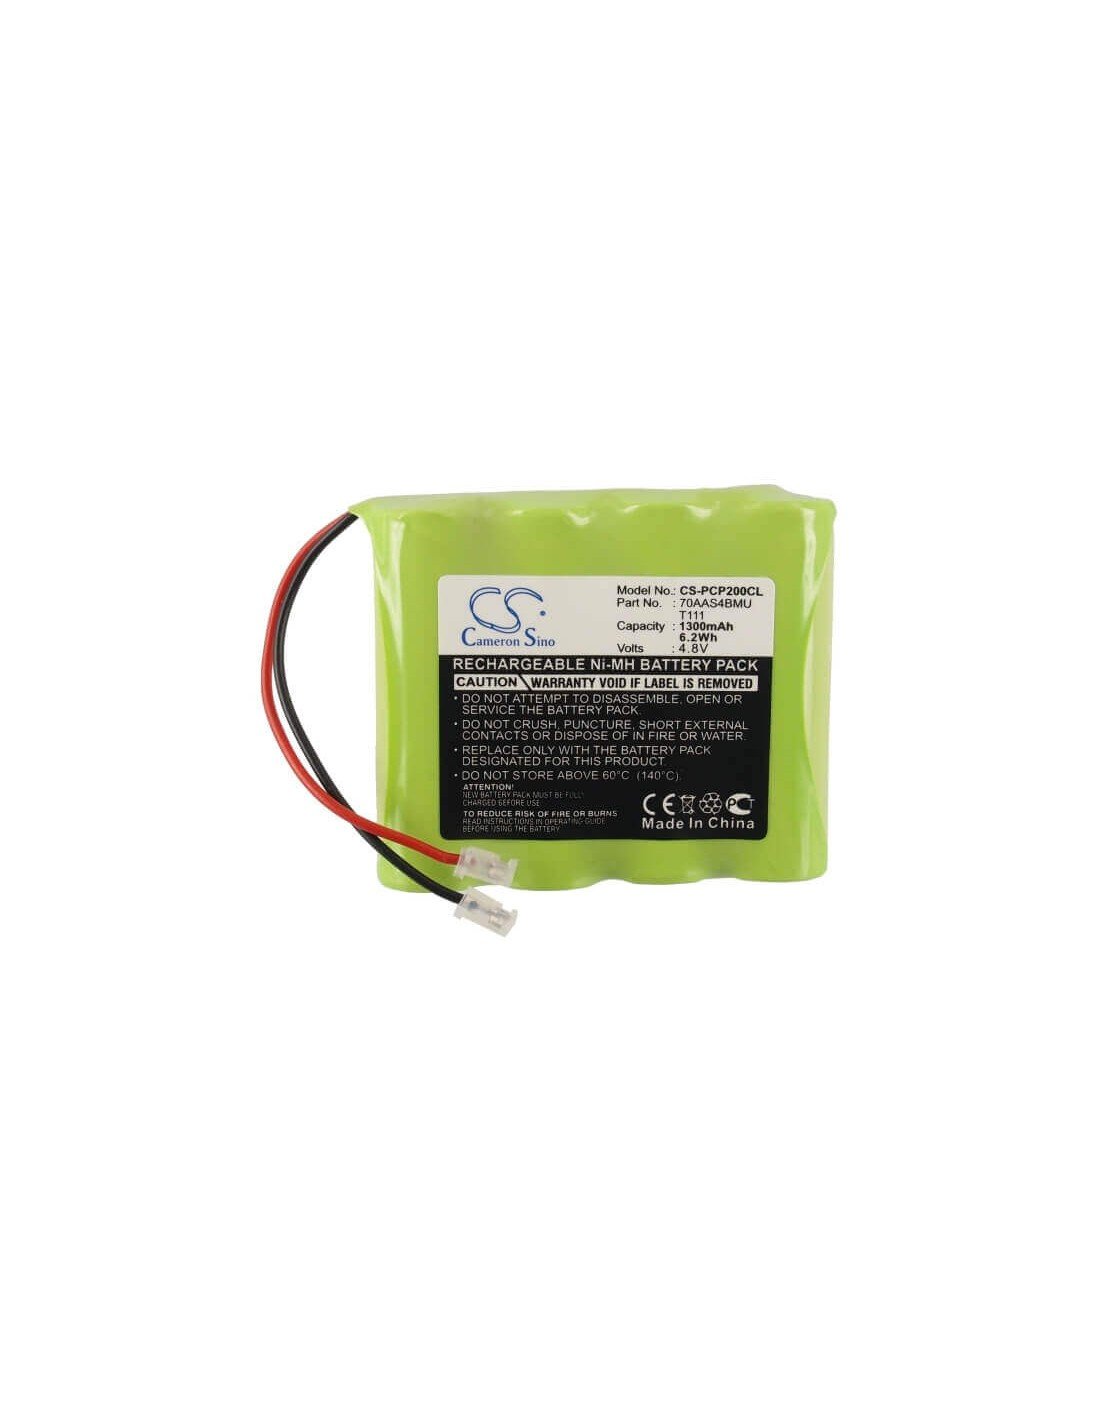 Battery for Philips, Cp200, Cp200s, Td9200 4.8V, 1300mAh - 6.24Wh